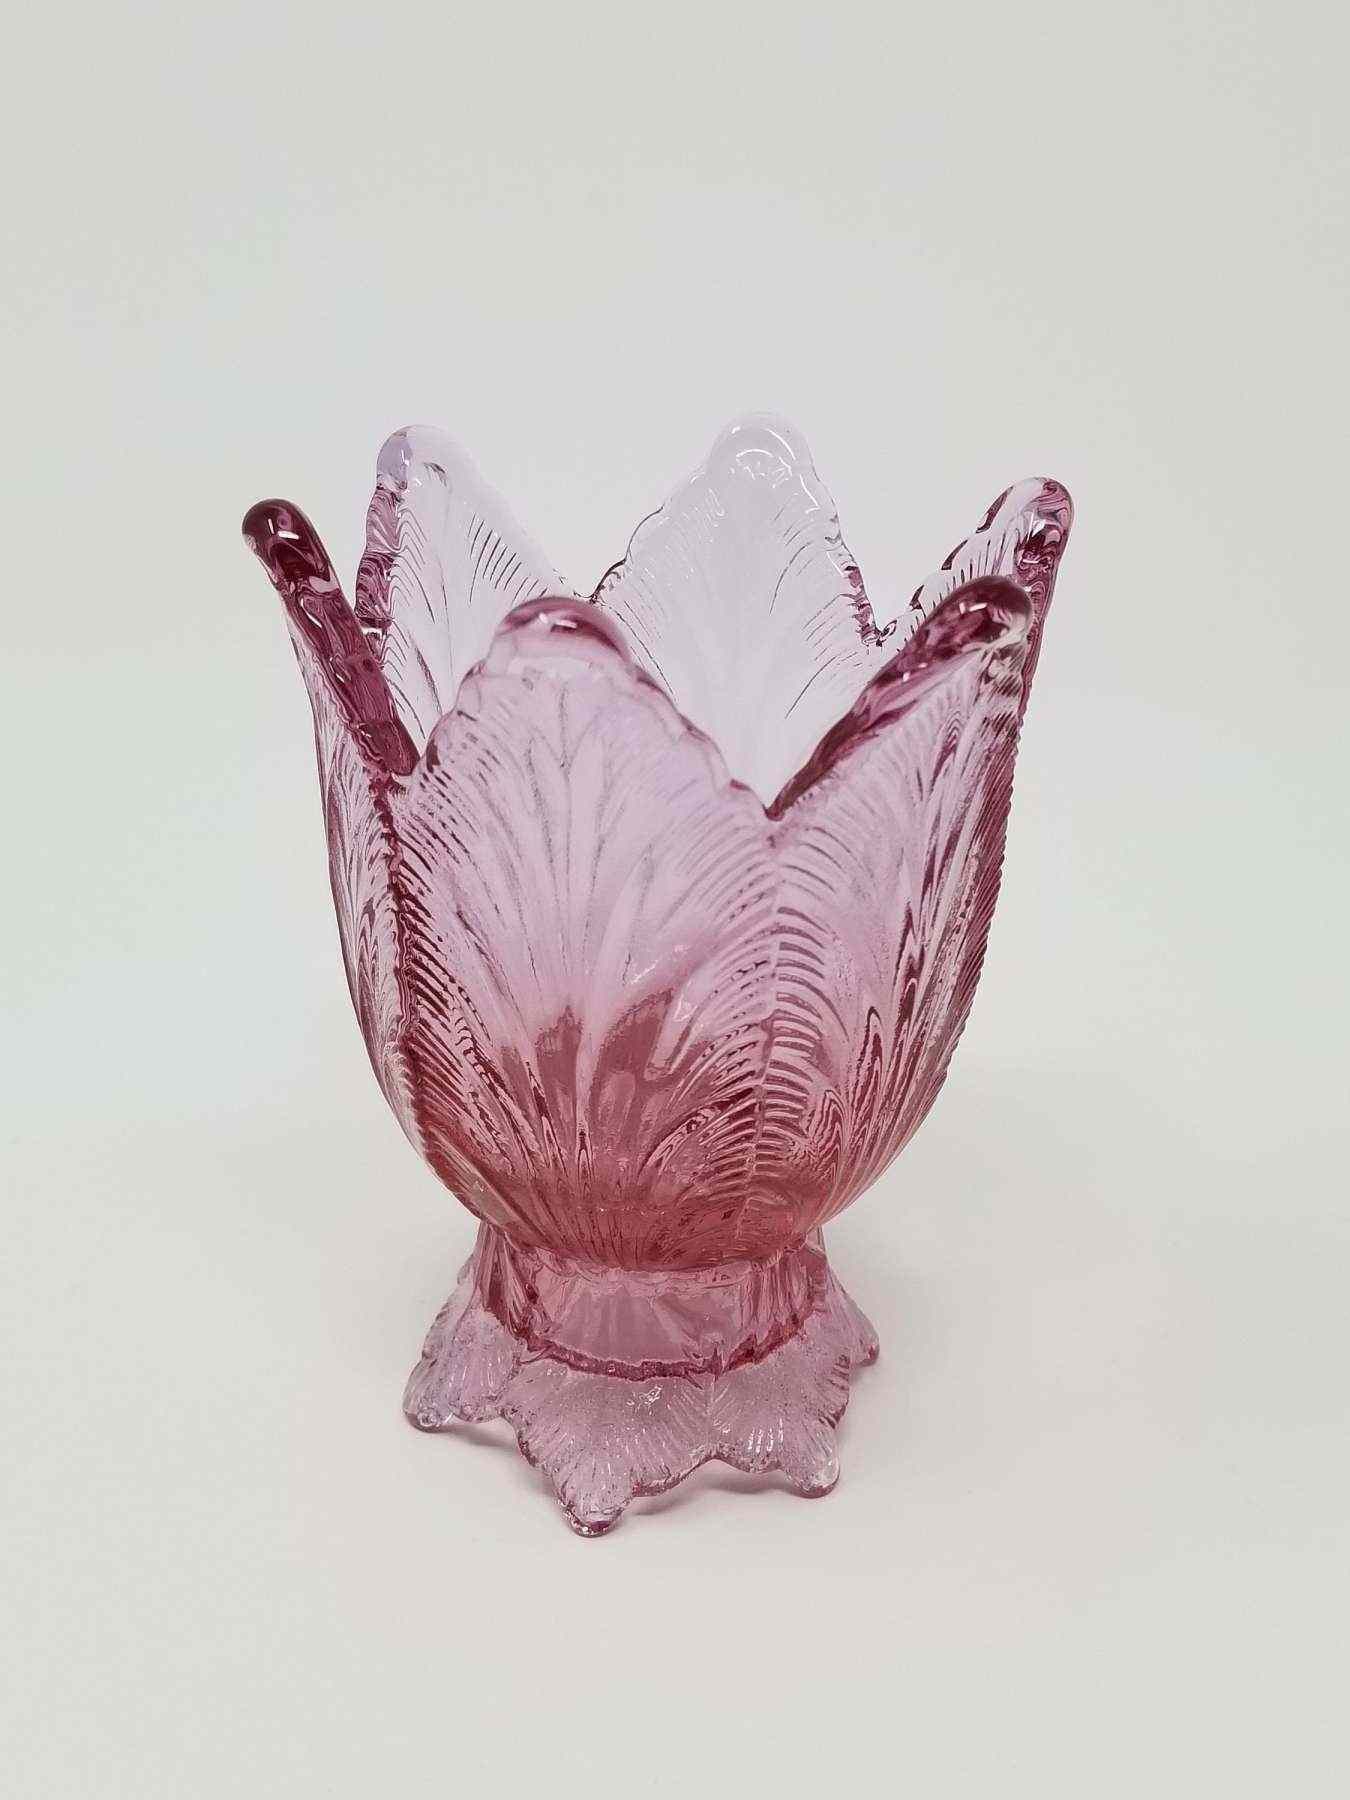 30 Famous Waterford Lismore Sugar Bud Vase 2024 free download waterford lismore sugar bud vase of waterford crystal bud vase inspirational clear glass votive candle intended for waterford crystal bud vase inspirational clear glass votive candle holders